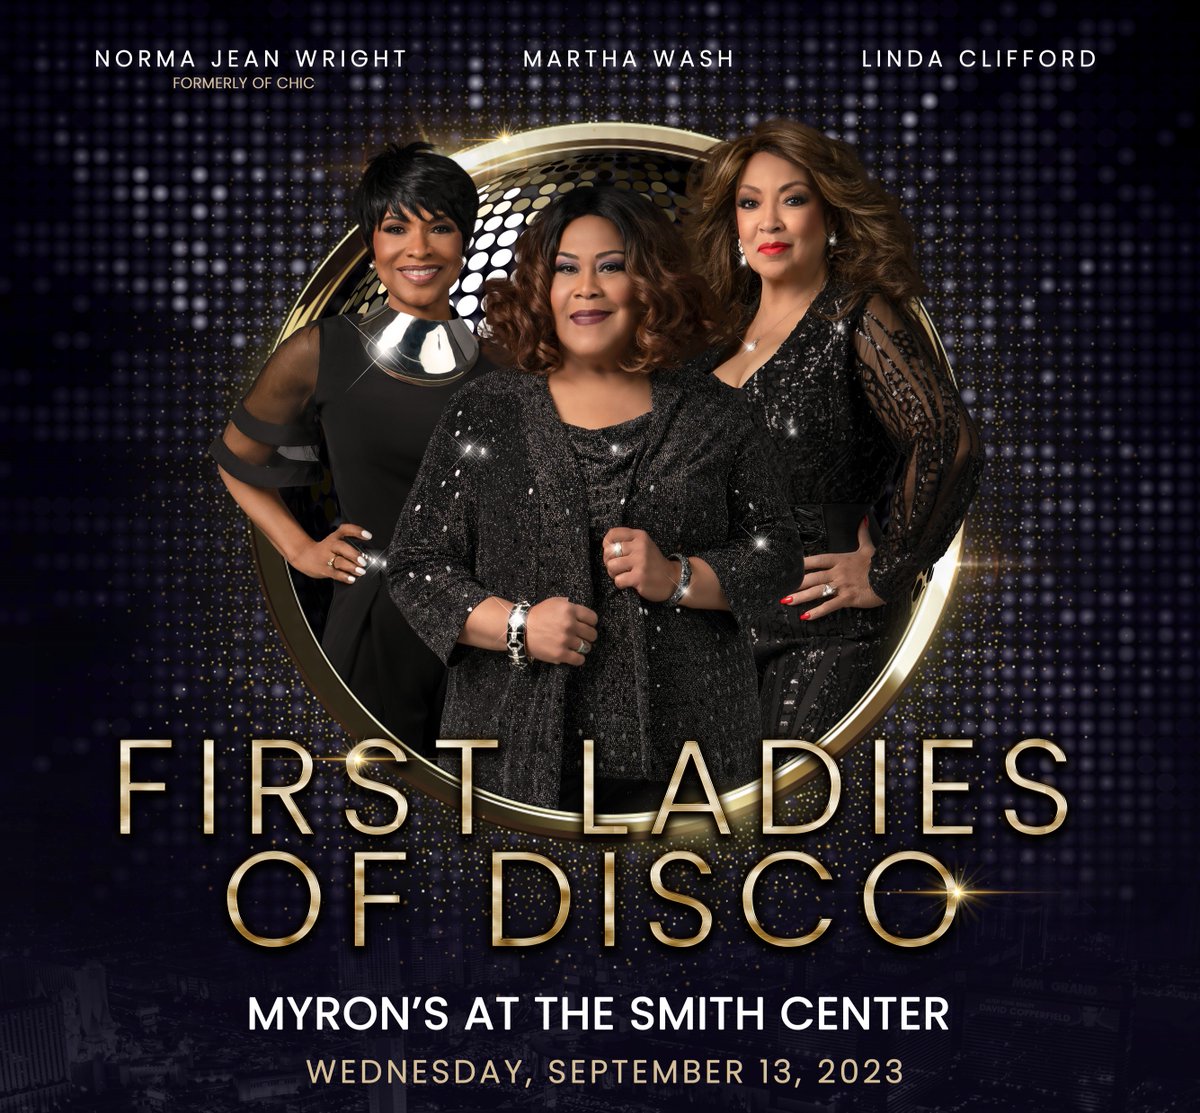 📷 SPECIAL SURPRISE GUEST ANNOUNCEMENT! 📷
We are thrilled to unveil a jaw-dropping surprise. Joining the already spectacular lineup of disco divas, a legendary performer will be gracing the stage with their iconic presence. Stay tuned for hints💜💜💜#thesmithcenter #dancemusic